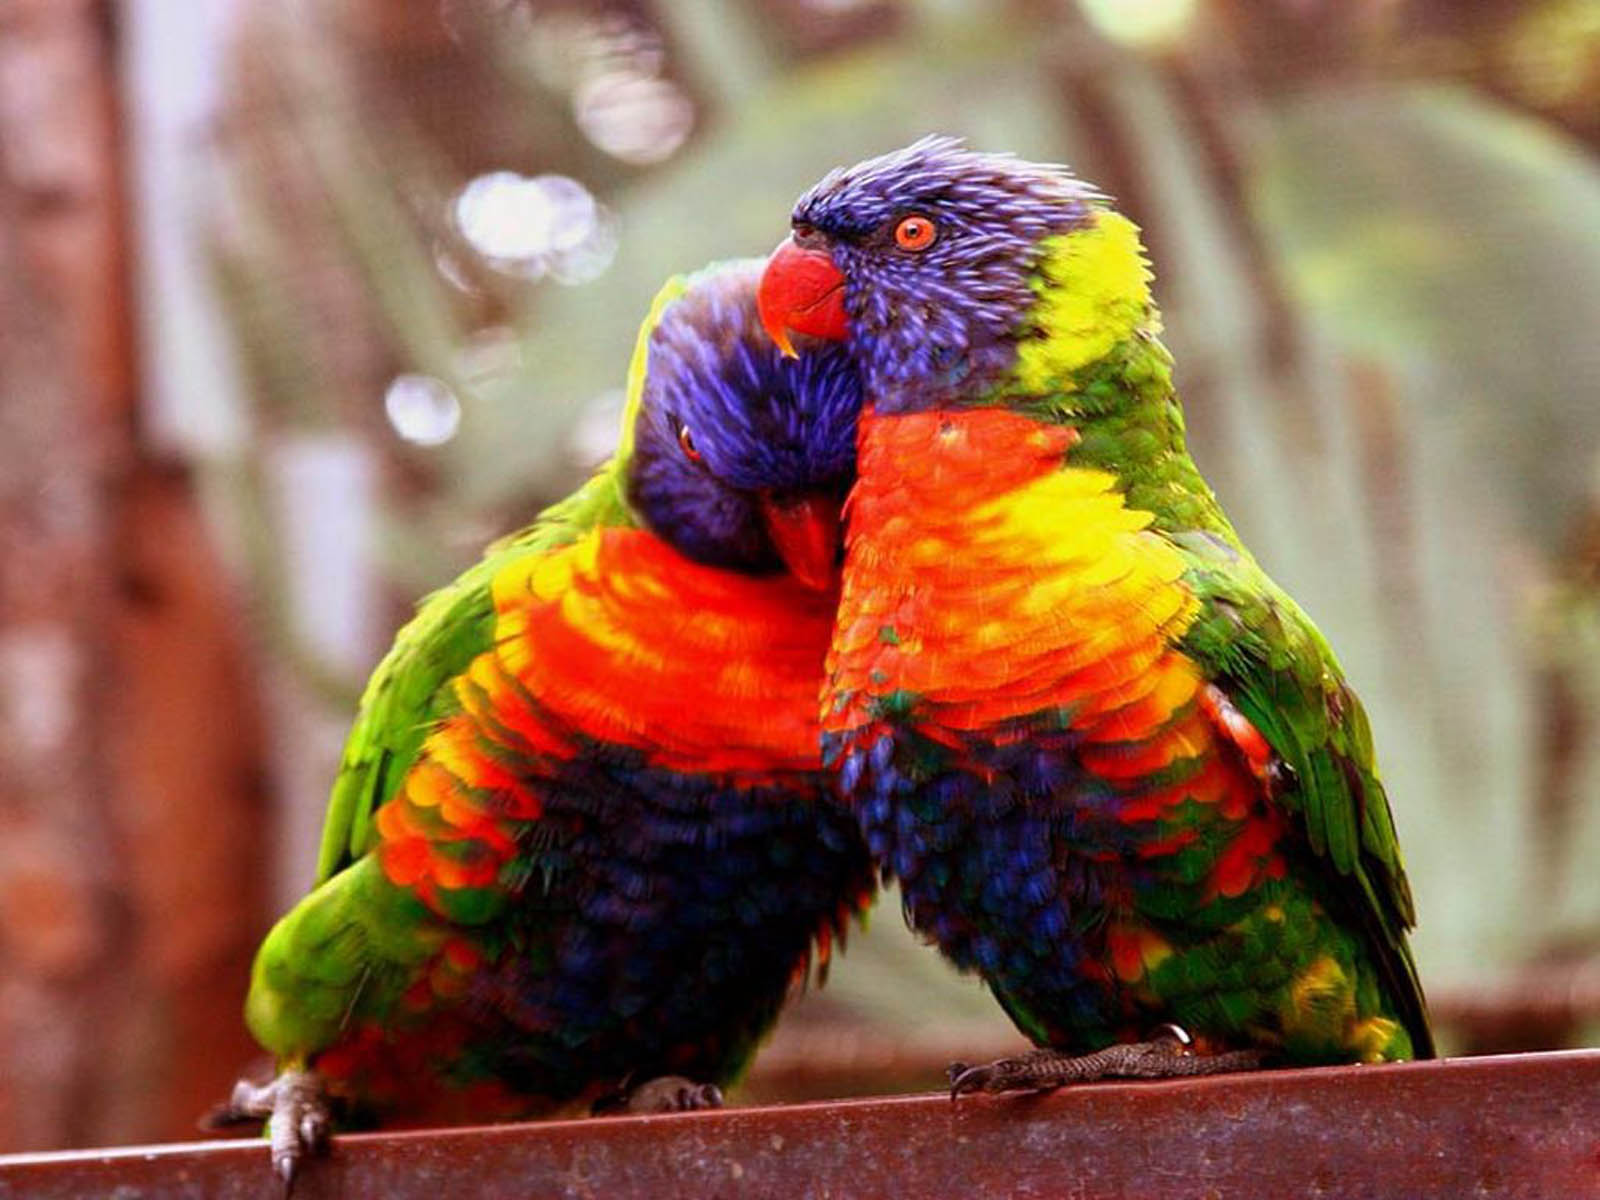 Tag Love Birds Wallpapers Backgrounds PhotosImages and Pictures